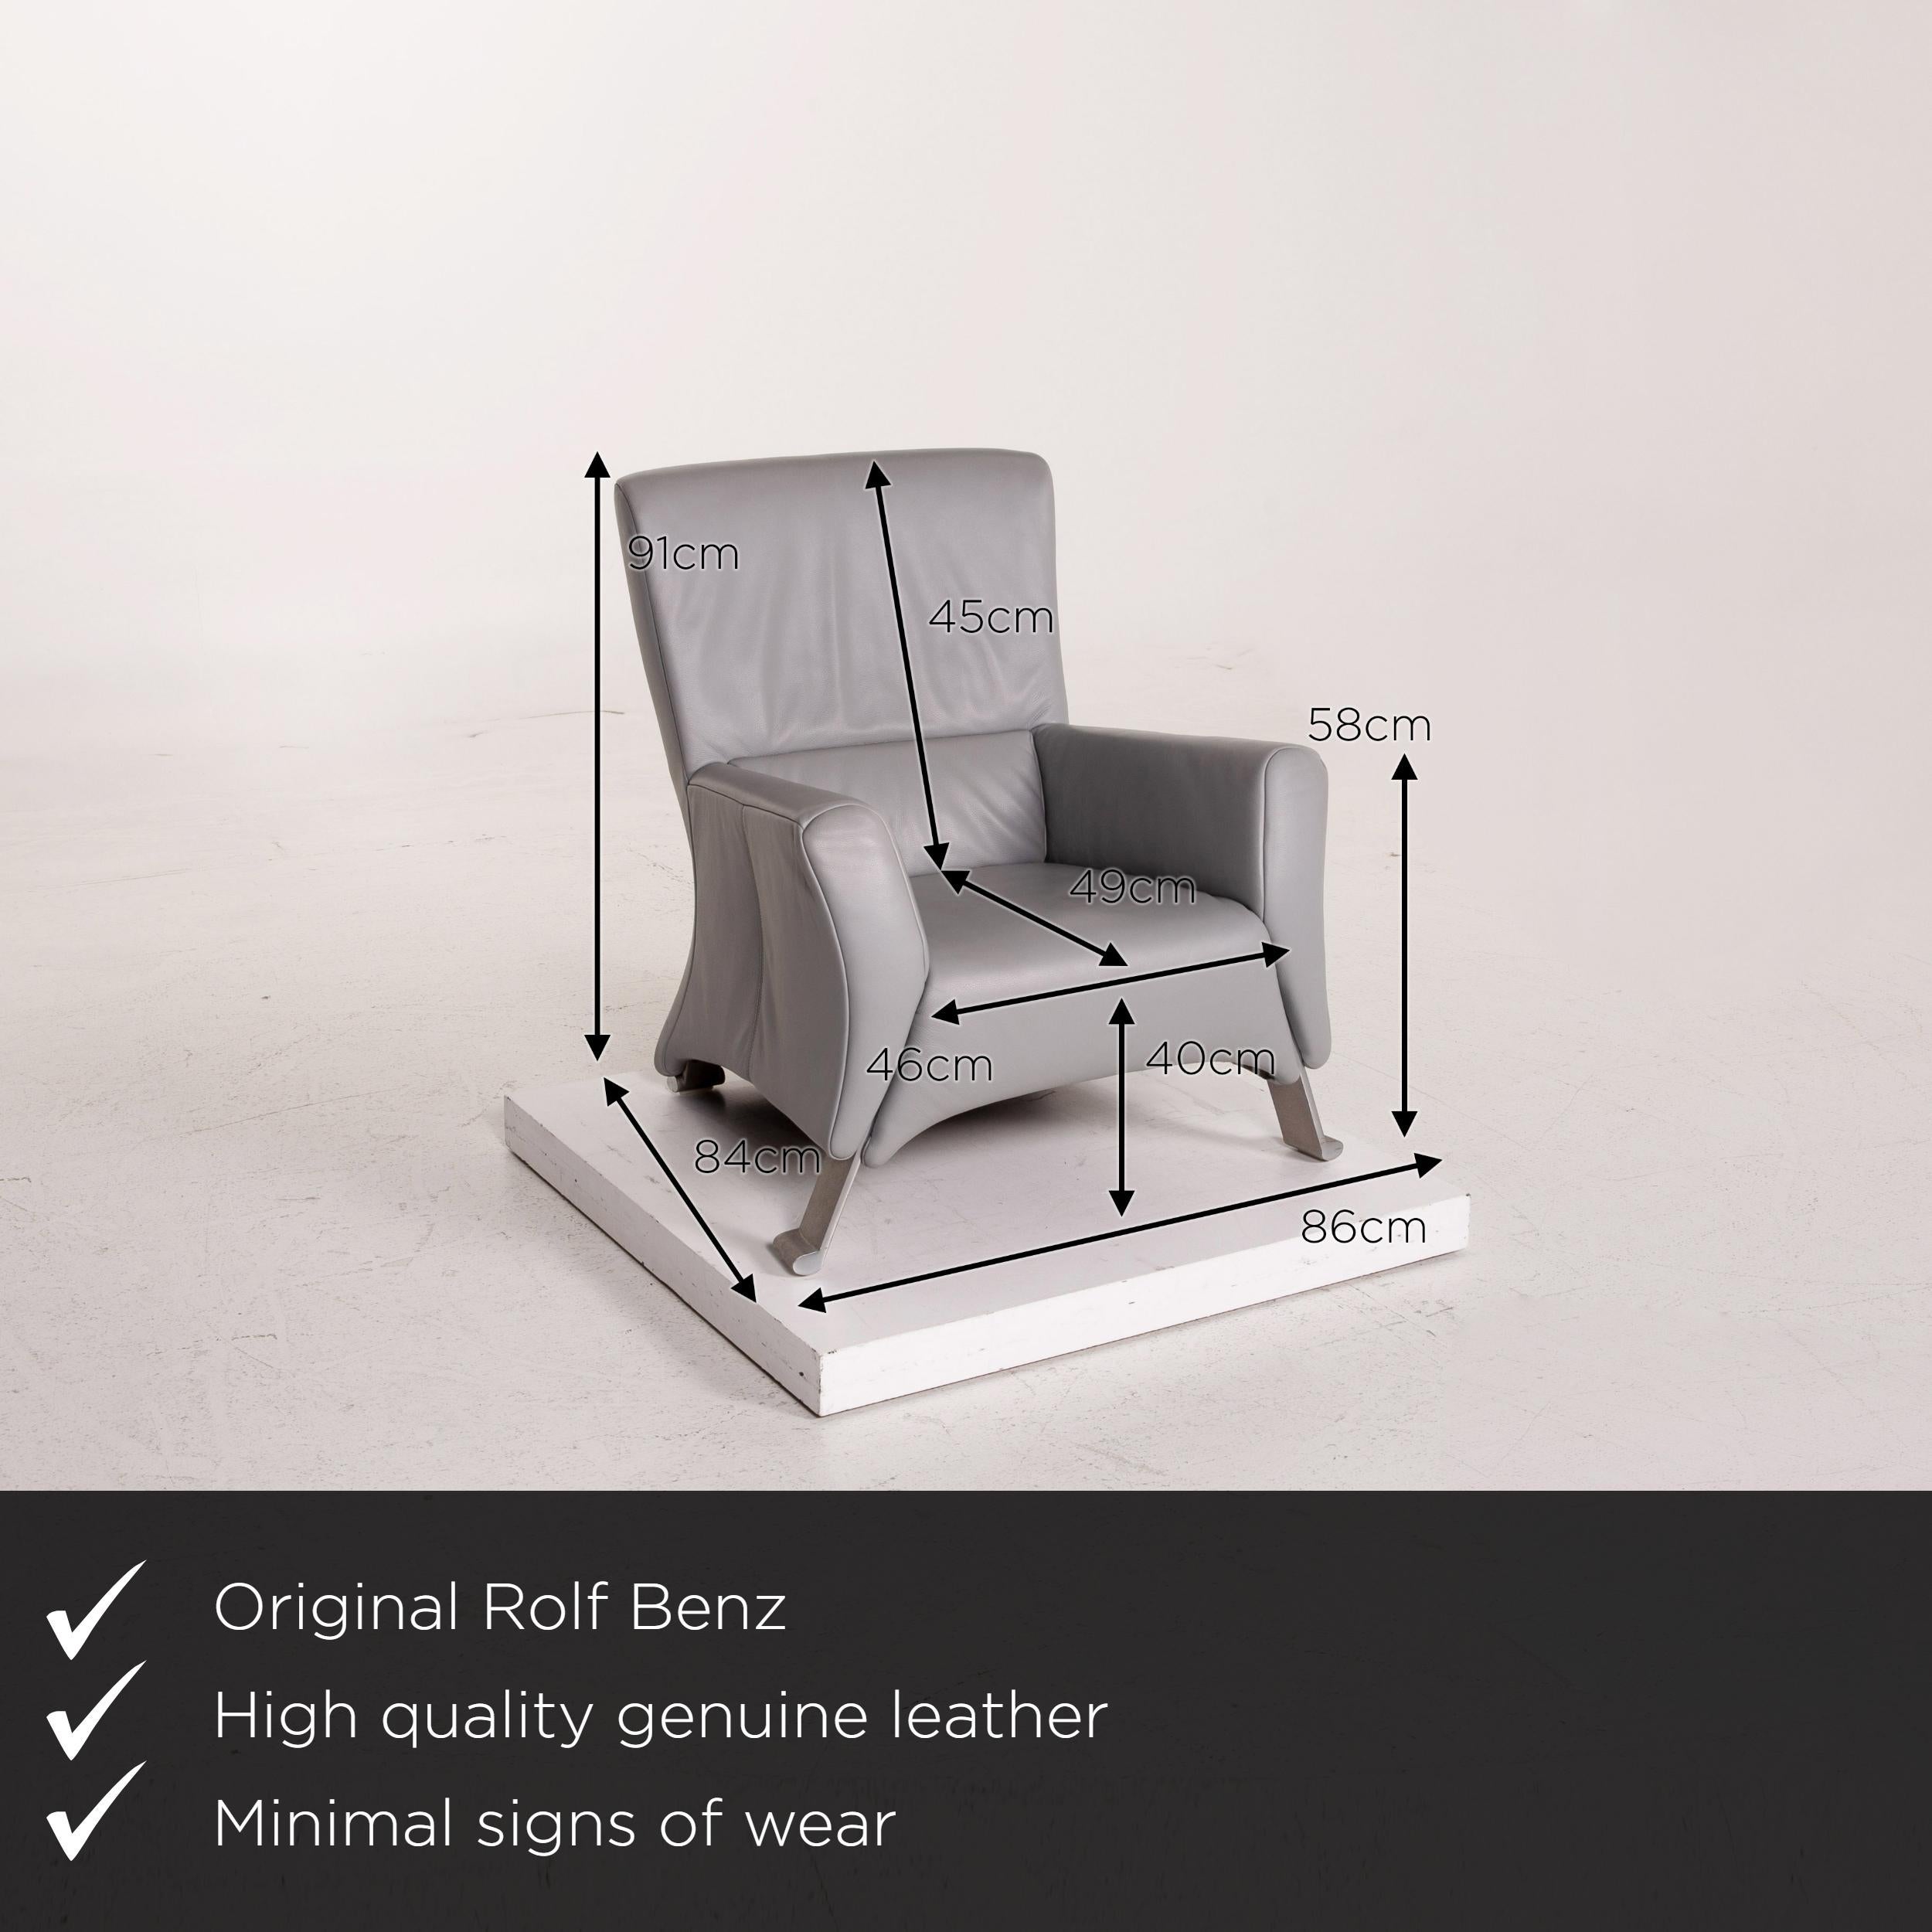 We present to you a Rolf Benz 322 leather armchair gray.


 Product measurements in centimeters:
 

Depth 84
Width 86
Height 91
Seat height 40
Rest height 58
Seat depth 49
Seat width 46
Back height 45.
   